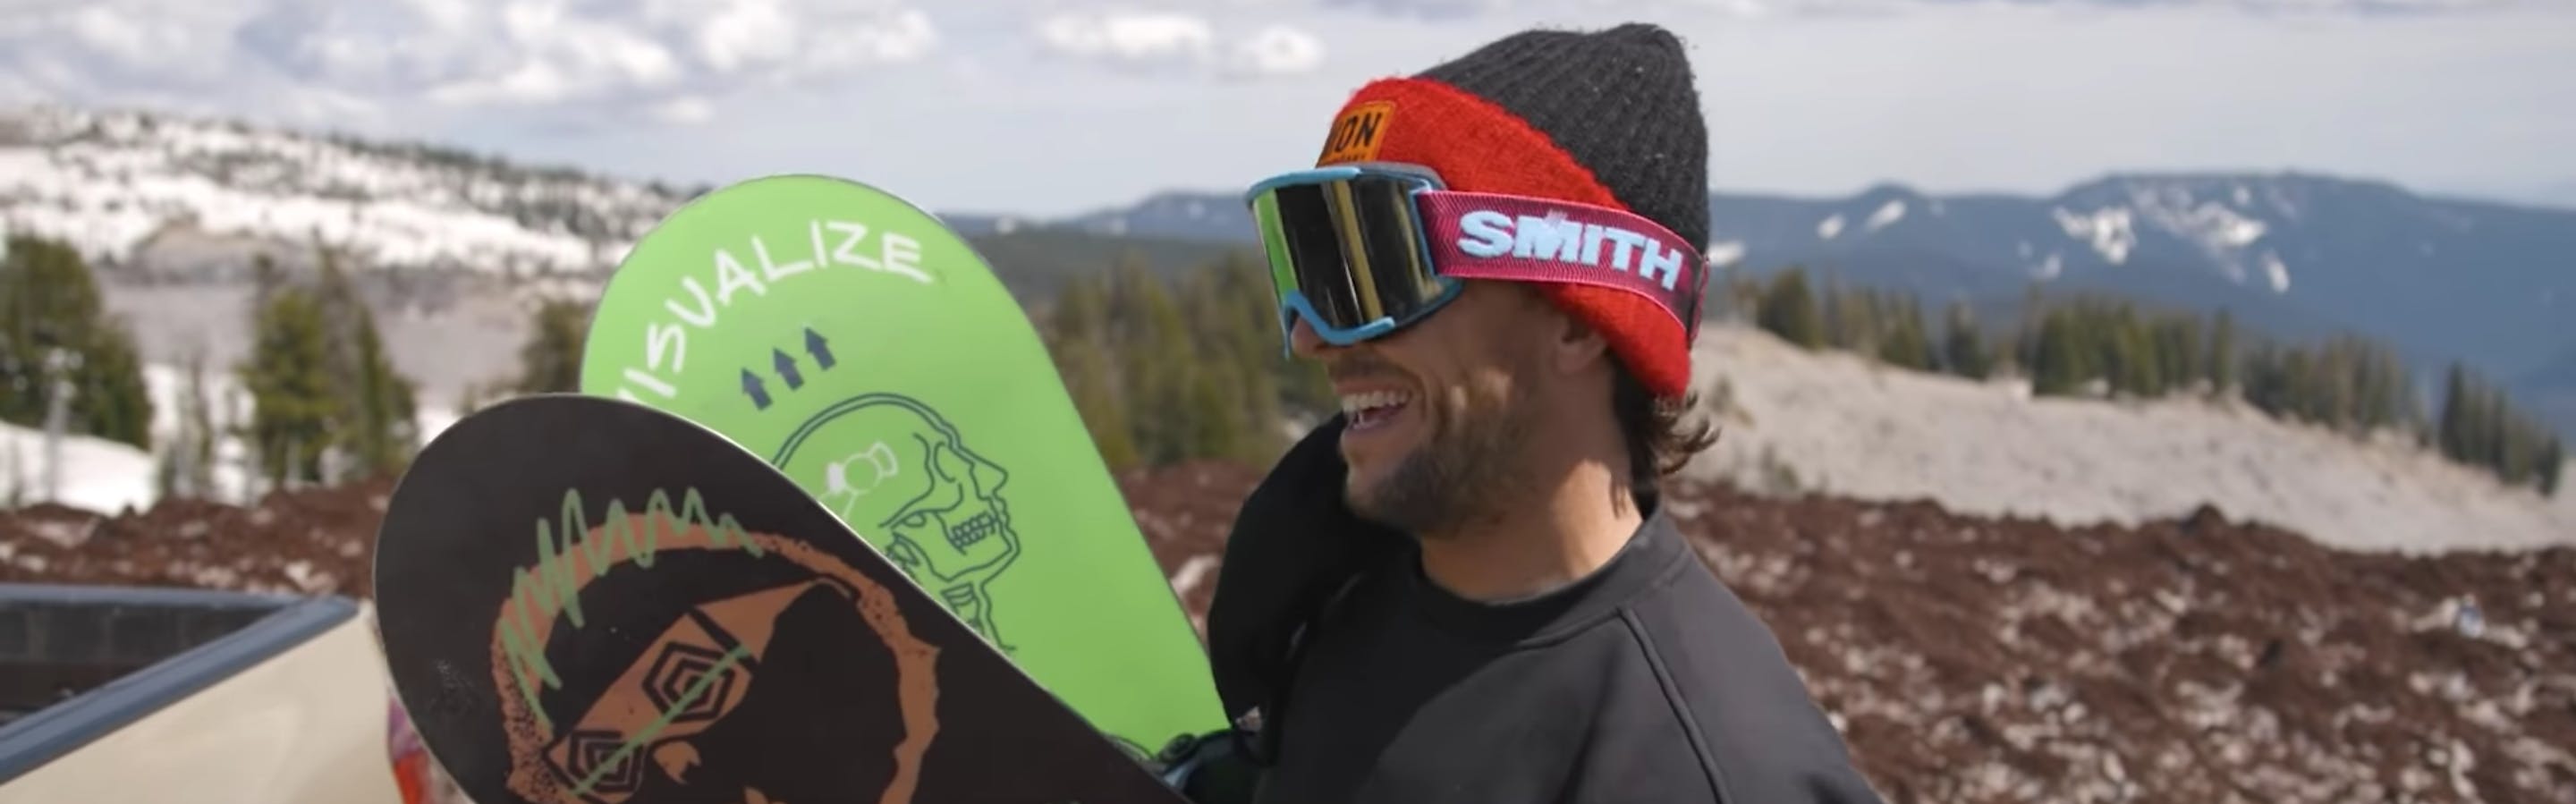 CAPiTA snowboarder, Scott Stevens, stands next to his car, holding his boards in this screenshot from ThirtyTwo's YouTube video "Scott Stevens Day in the Life 2021."